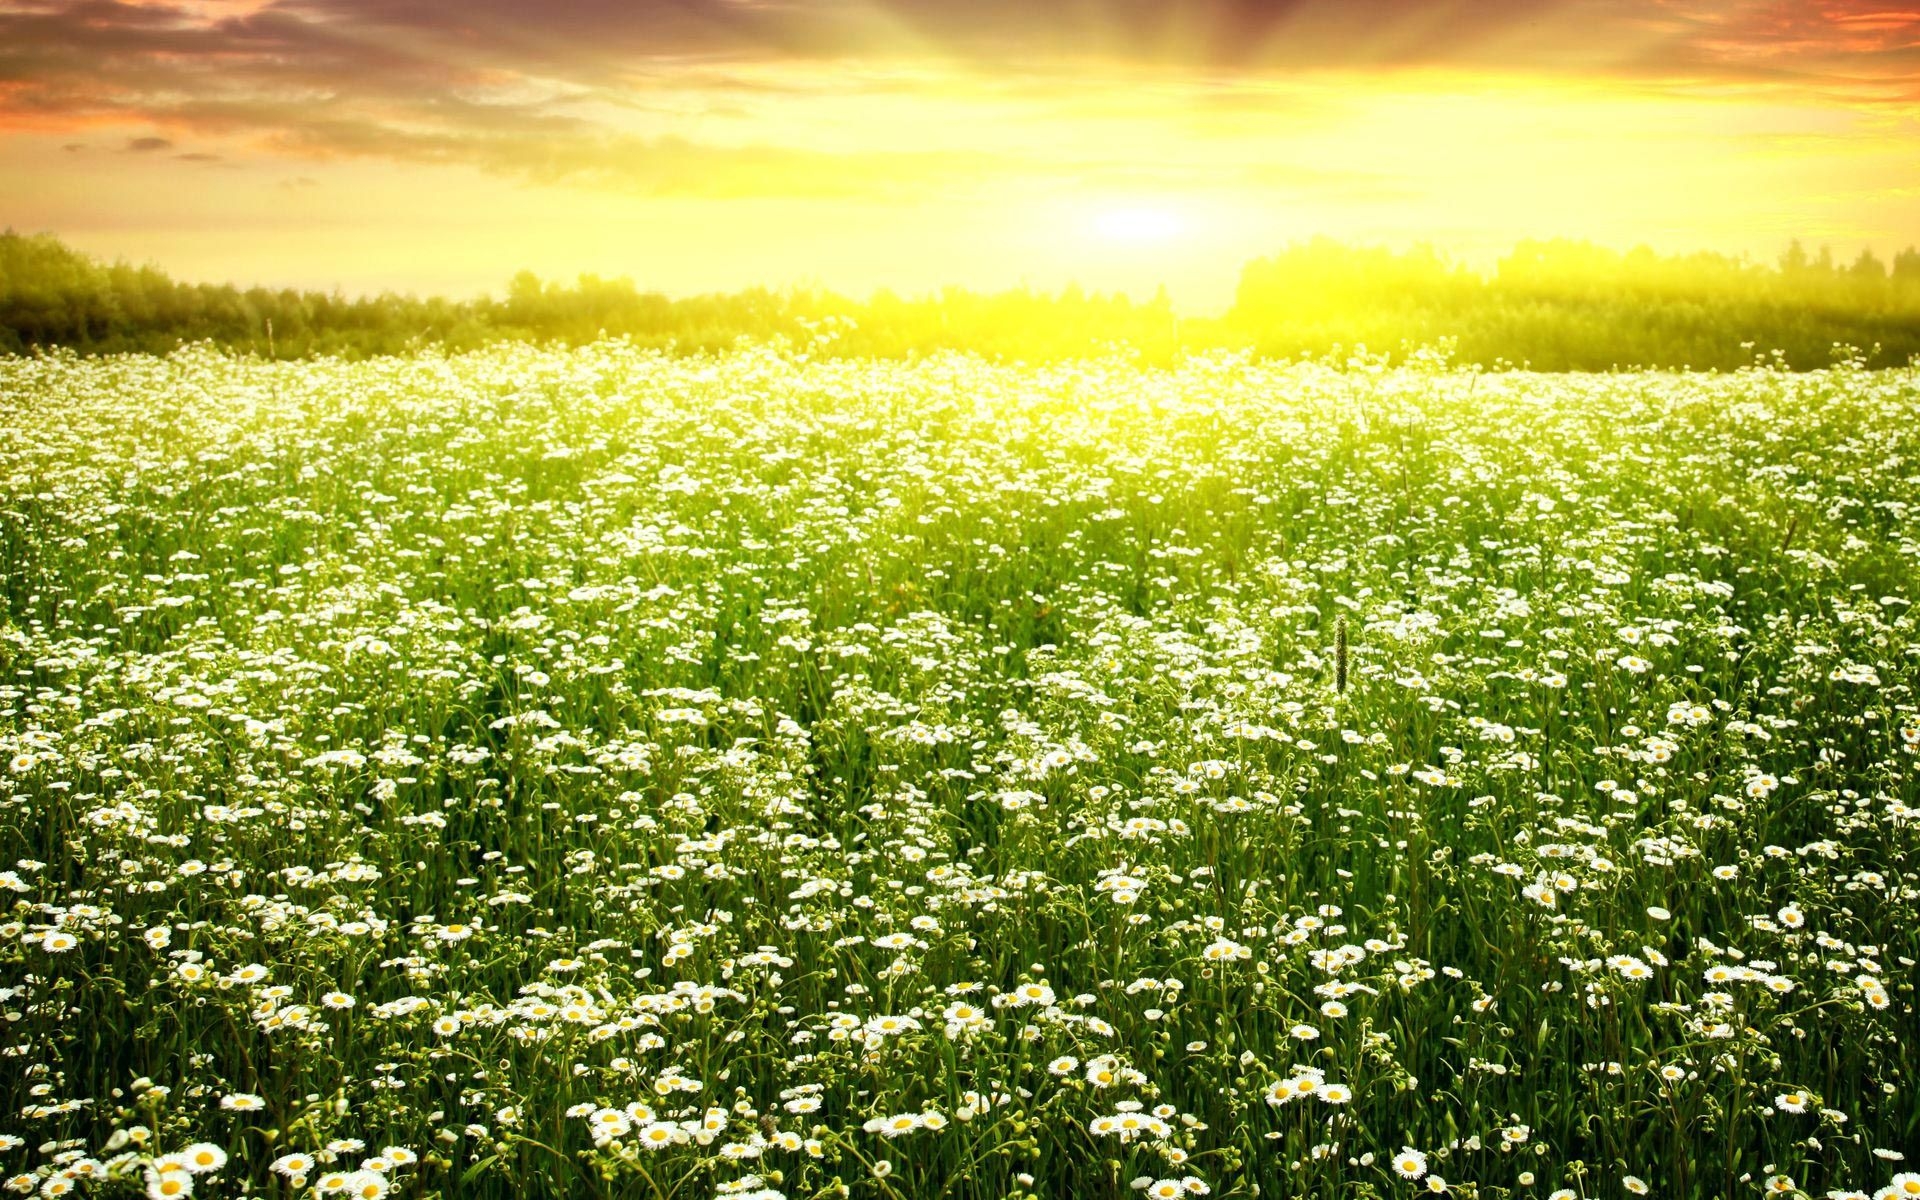 A field of blooming daisies at sunset